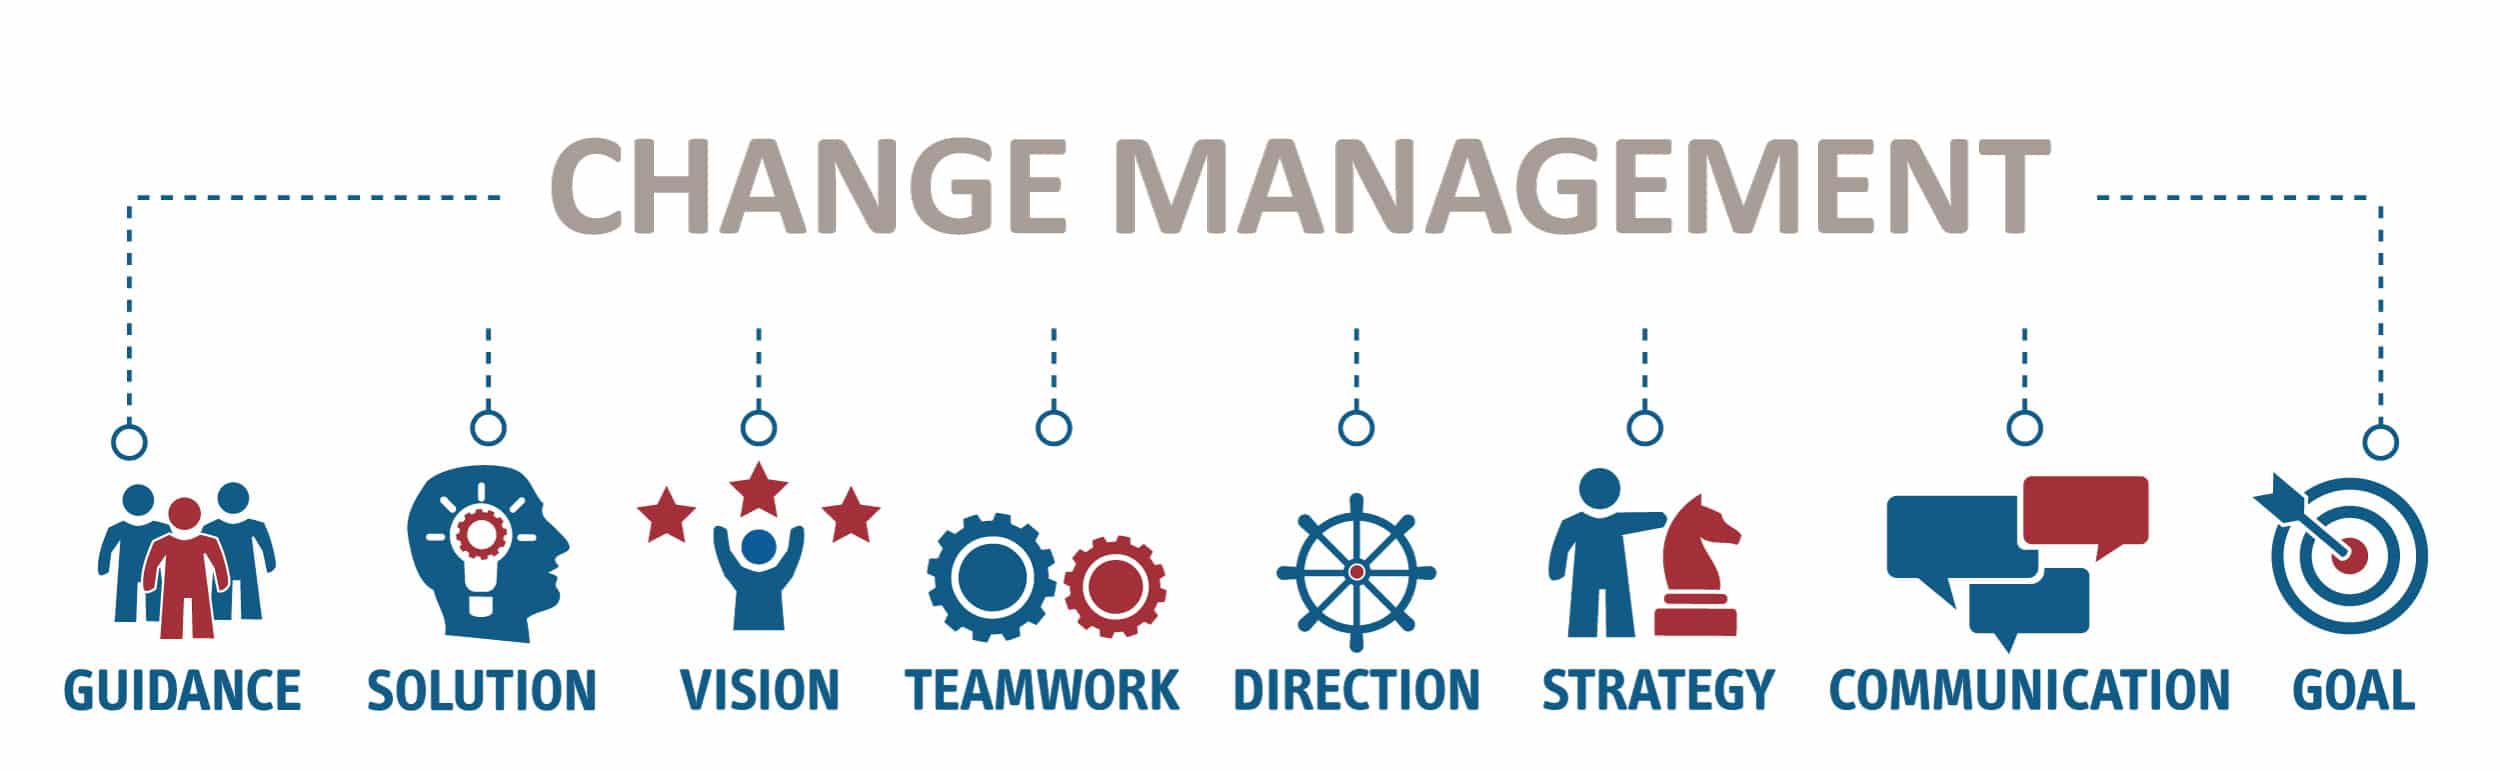 change management graphic with icons to represent the most important aspects of change management: guidance, solution, vision, teamwork, direction, strategy, communication, goal